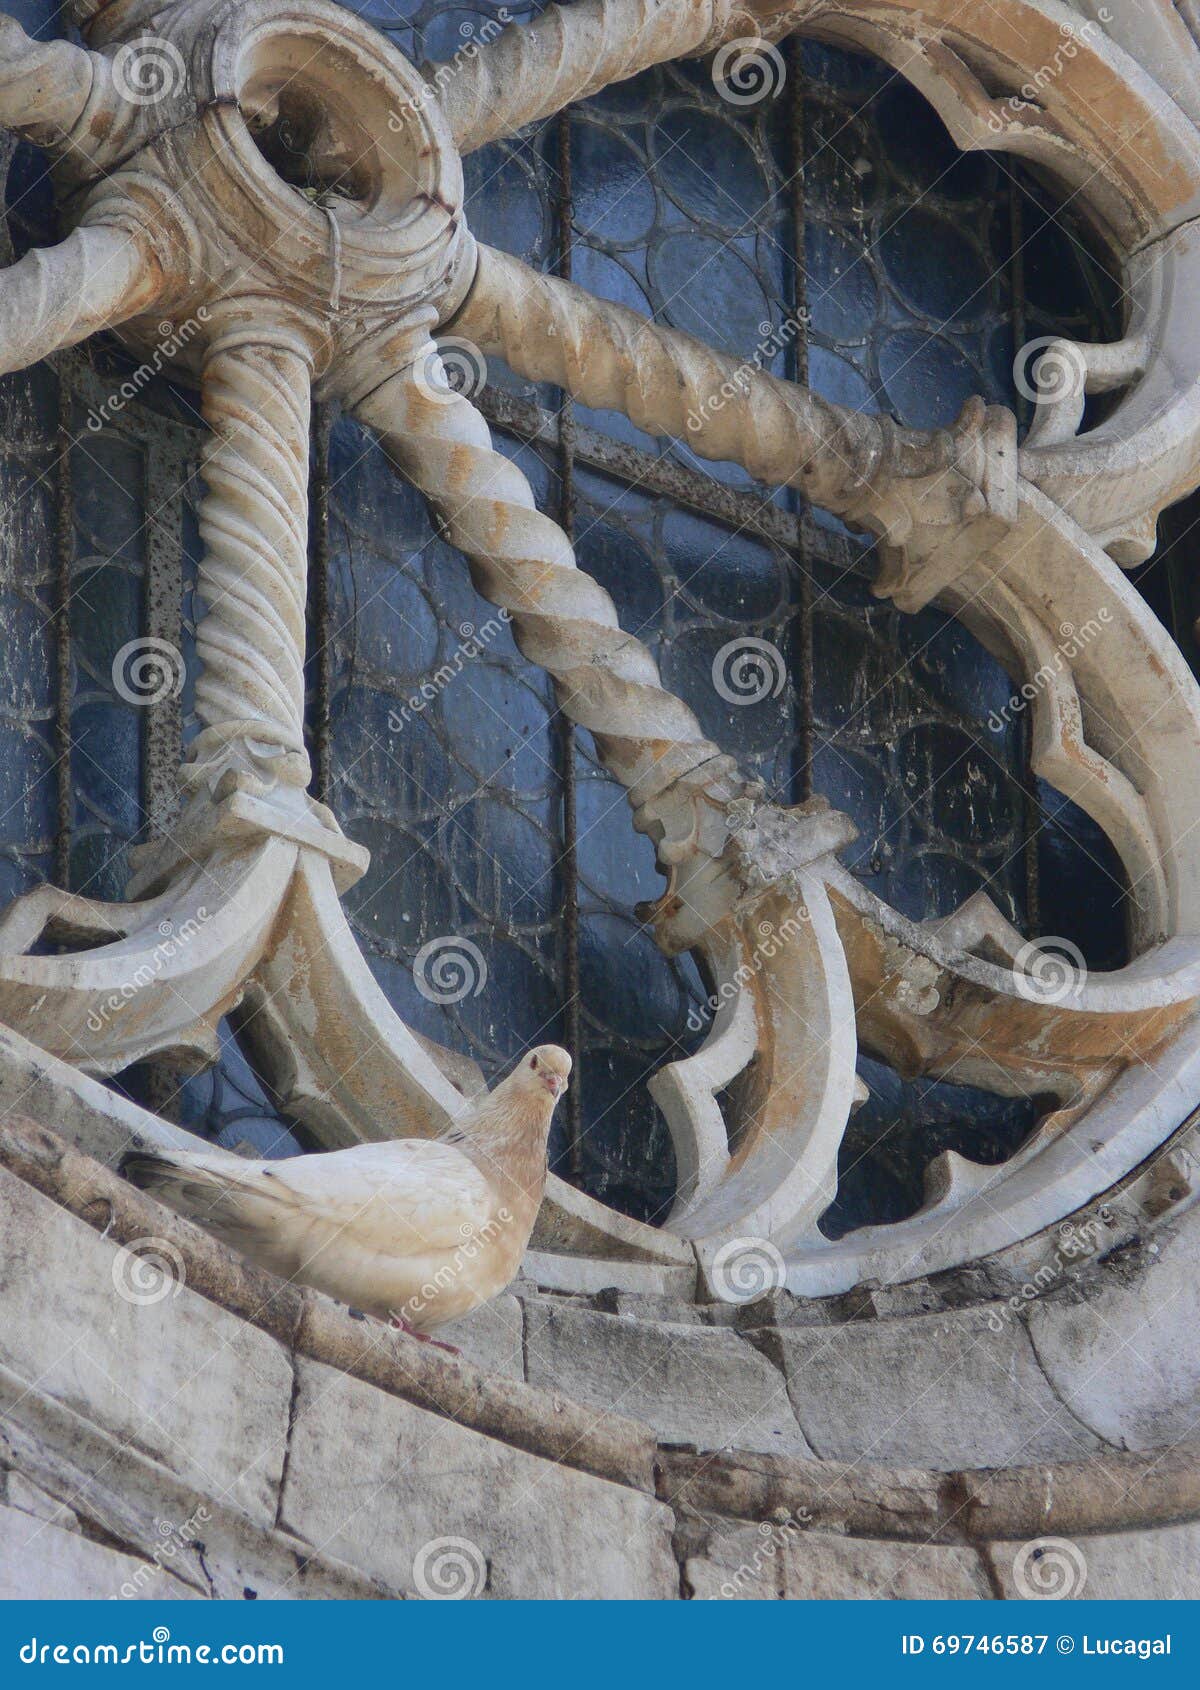 white dove resting on old rose window of romanesque church